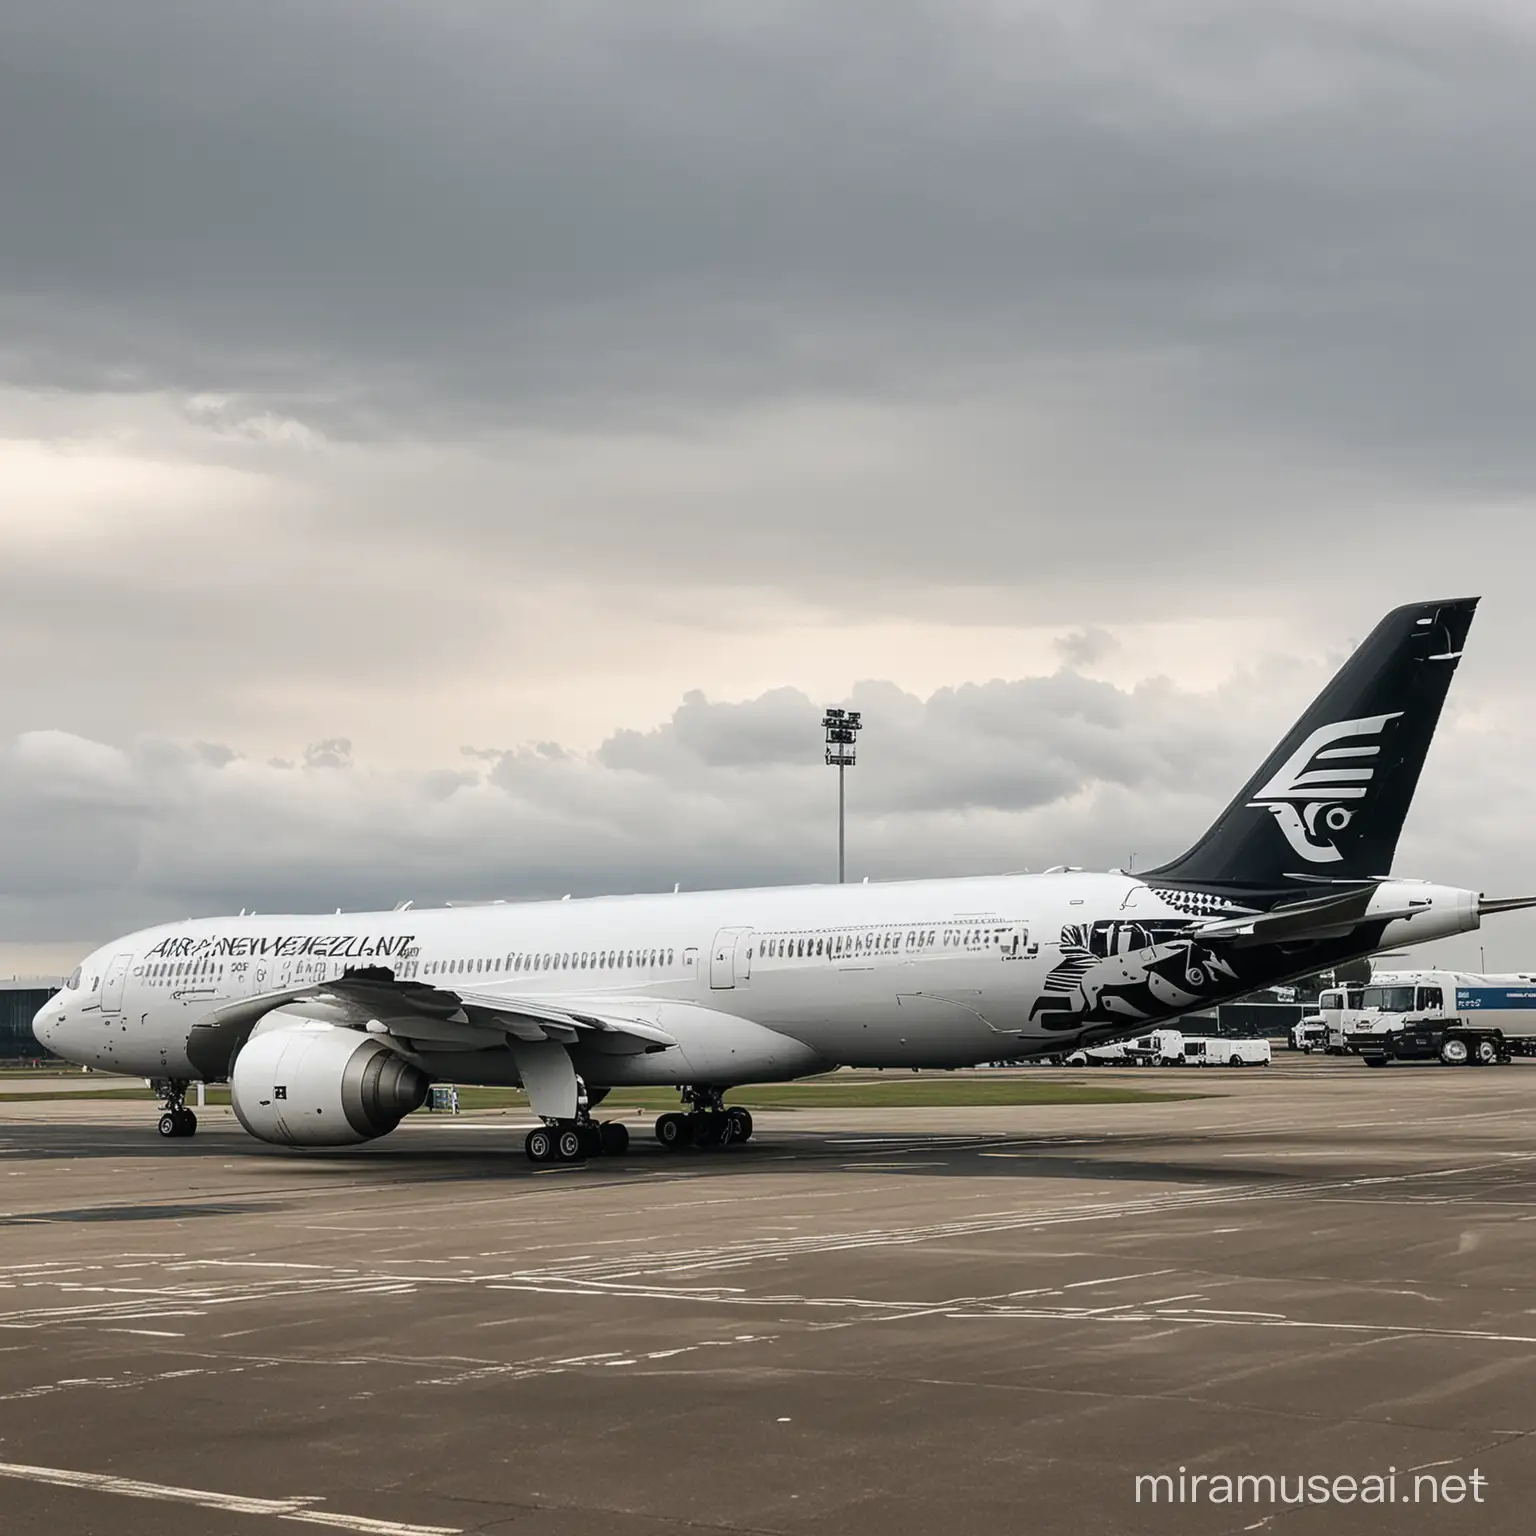 Air New Zealand Plane Parked at Vaclav Havel Airport Prague